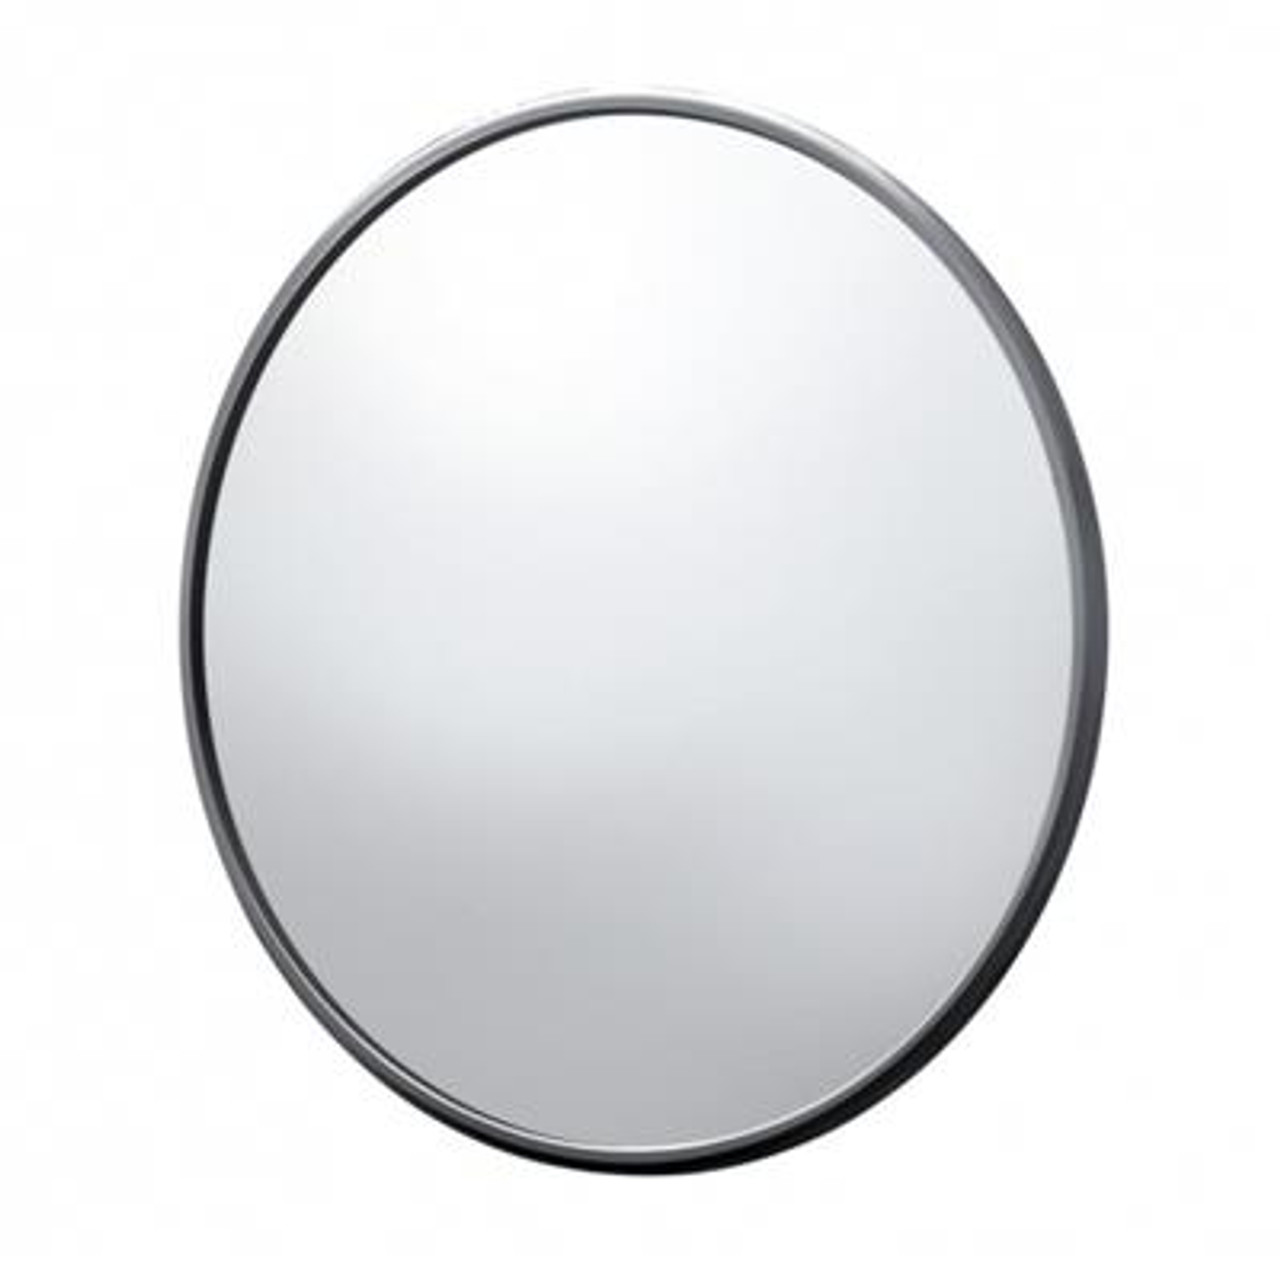 United Pacific has a wide variety of mirrors for classic cars & trucks.